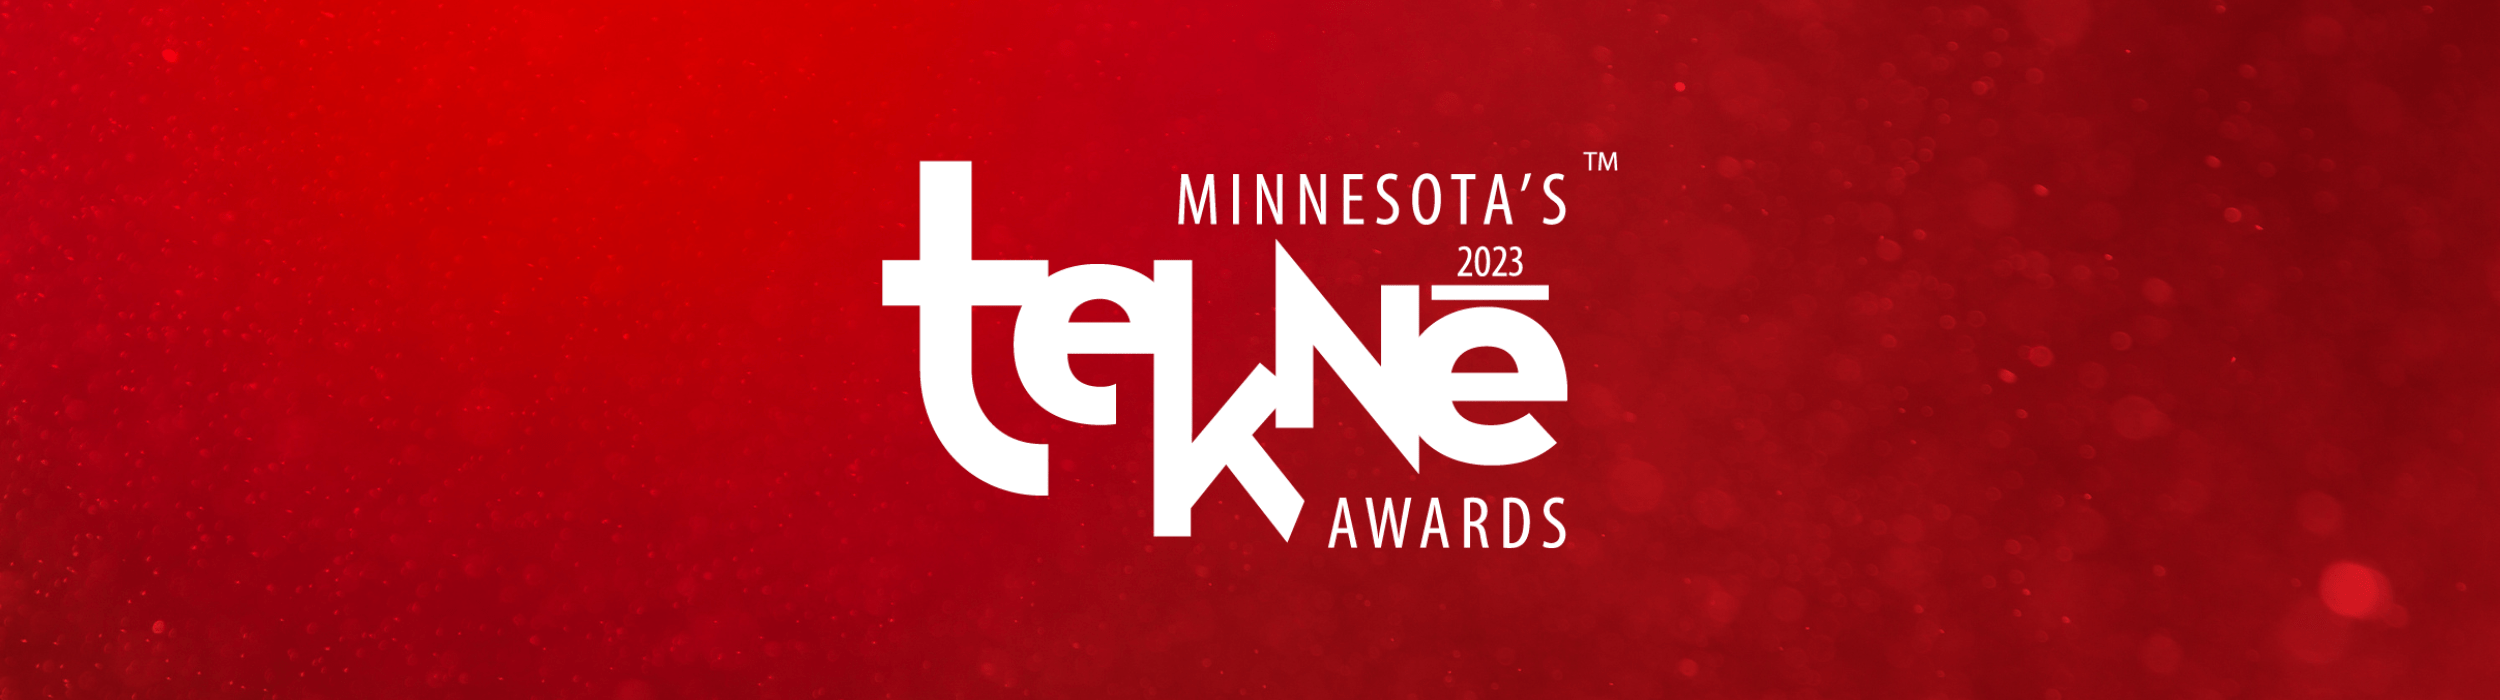 Applications for the 2023 Tekne Awards Are Open